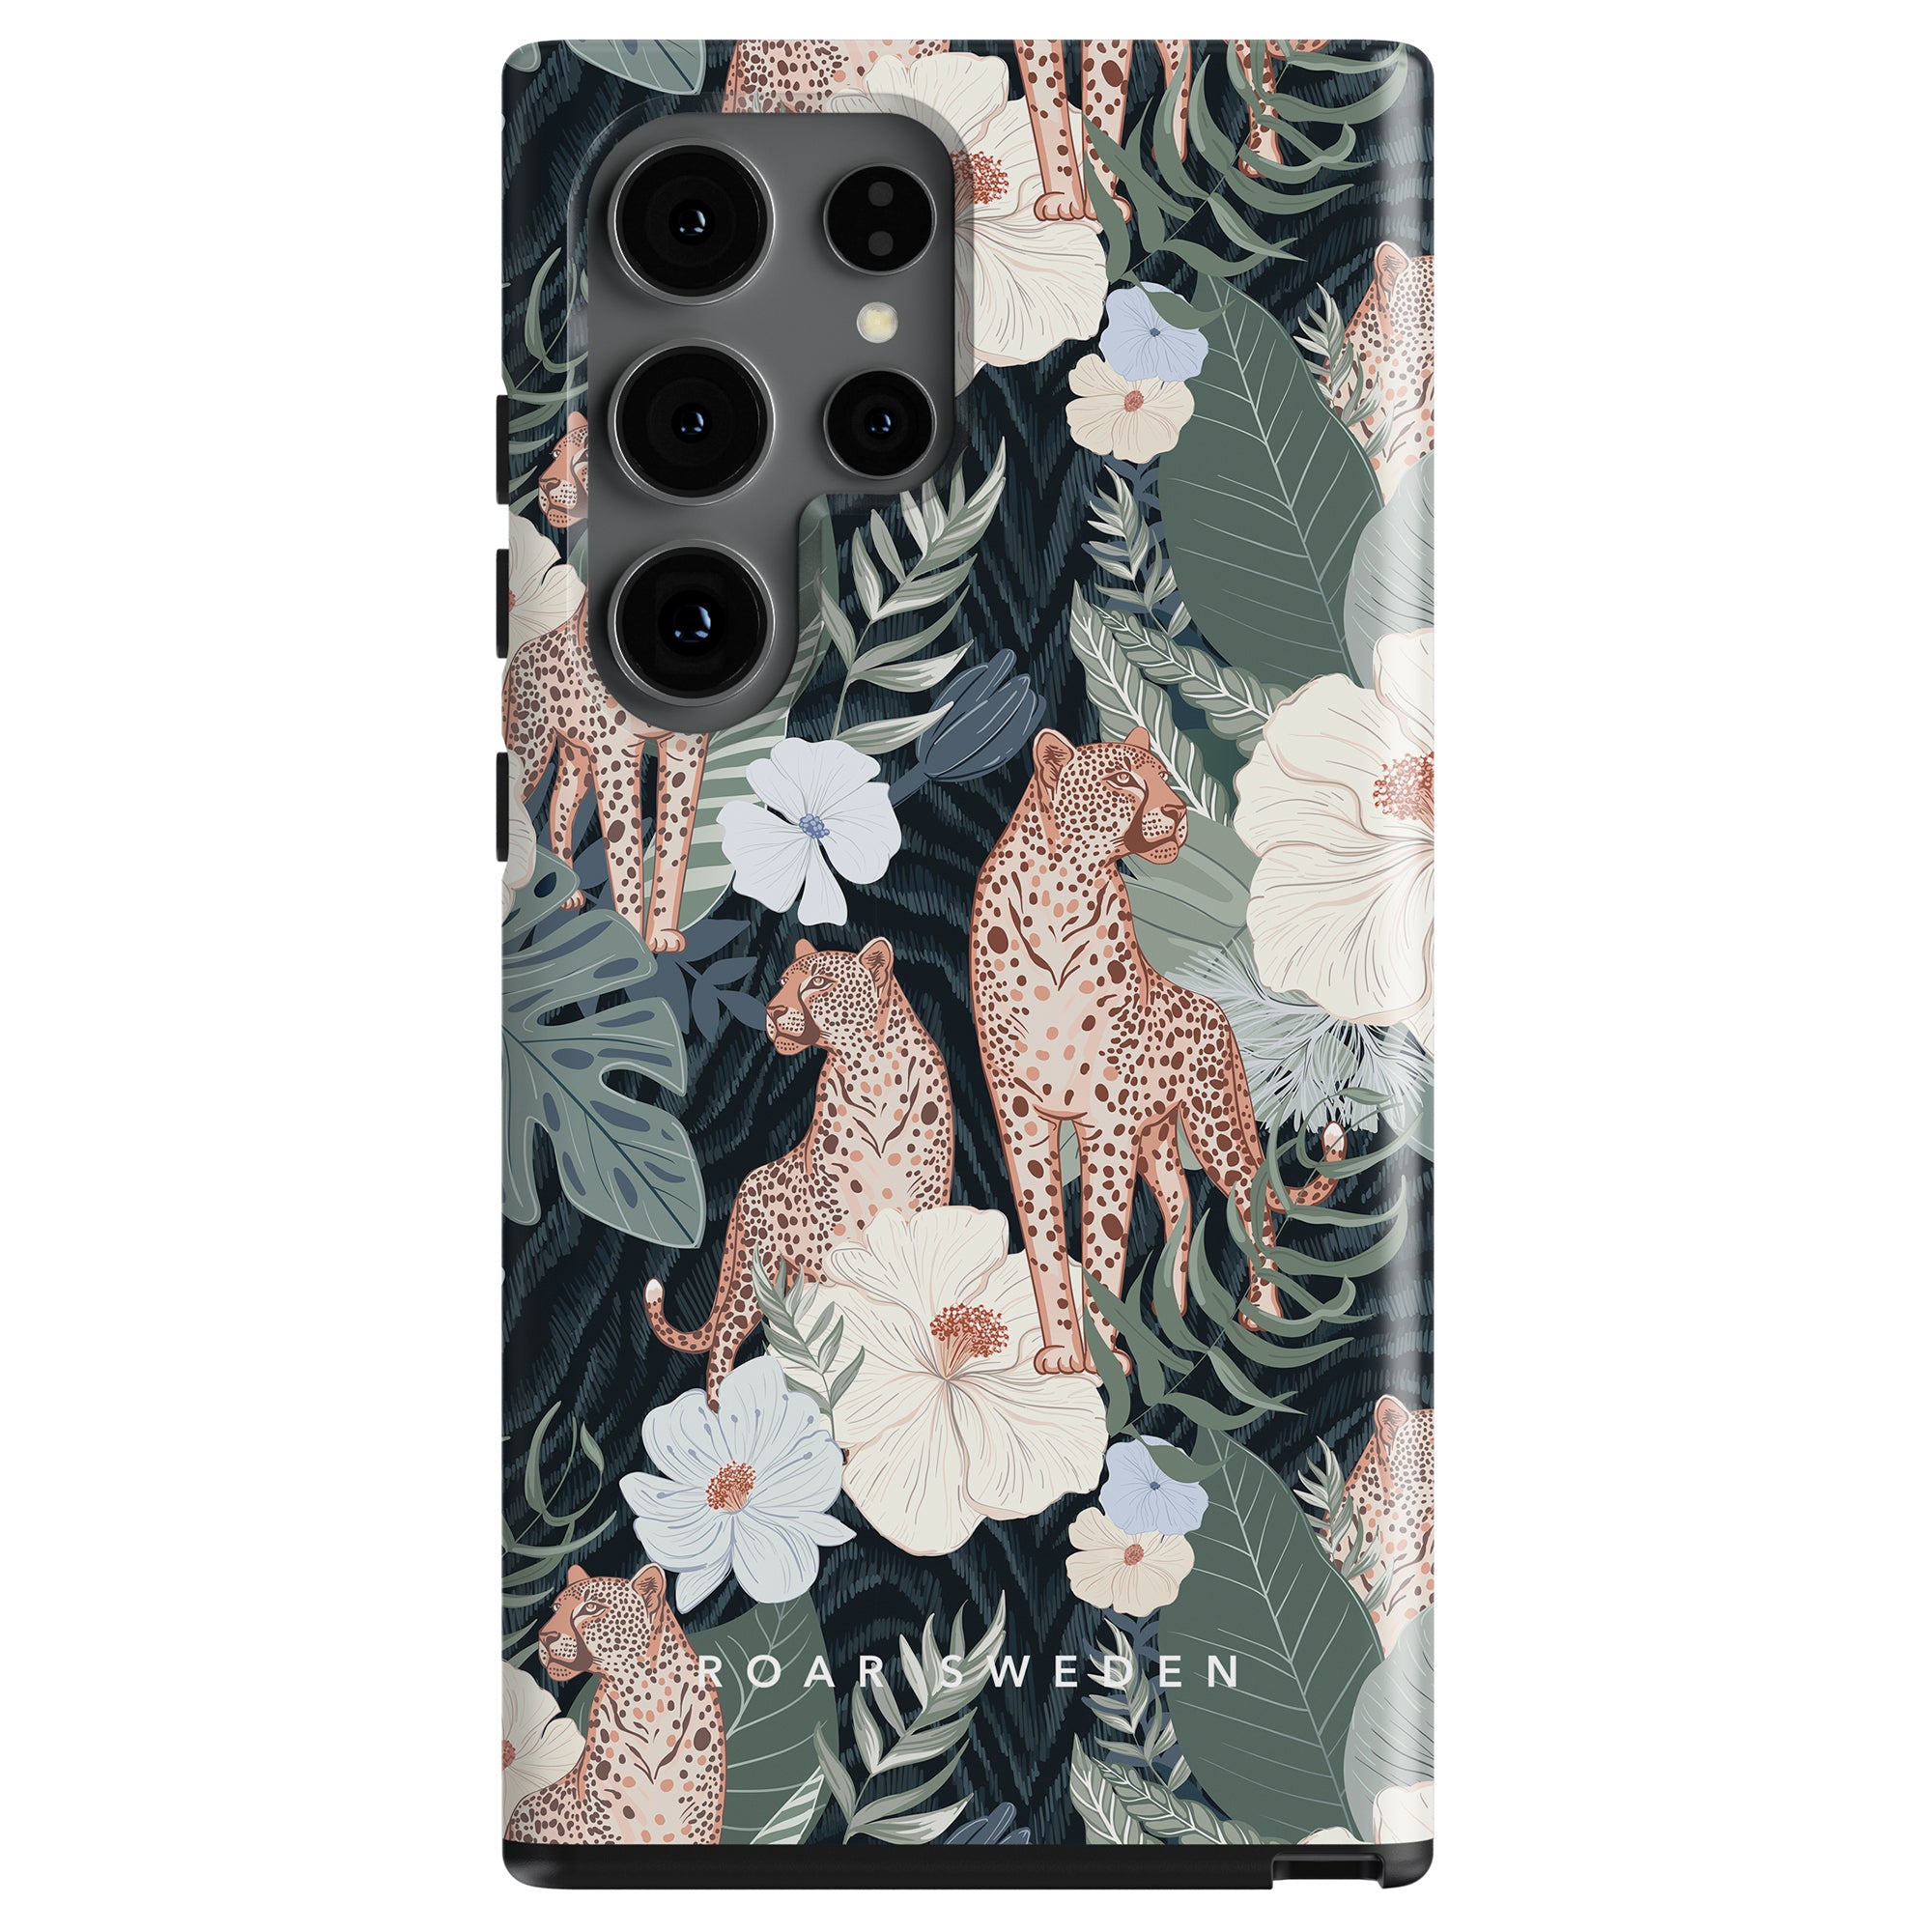 A smartphone with a Leopardess - Tough Case featuring Leopardess and floral print.